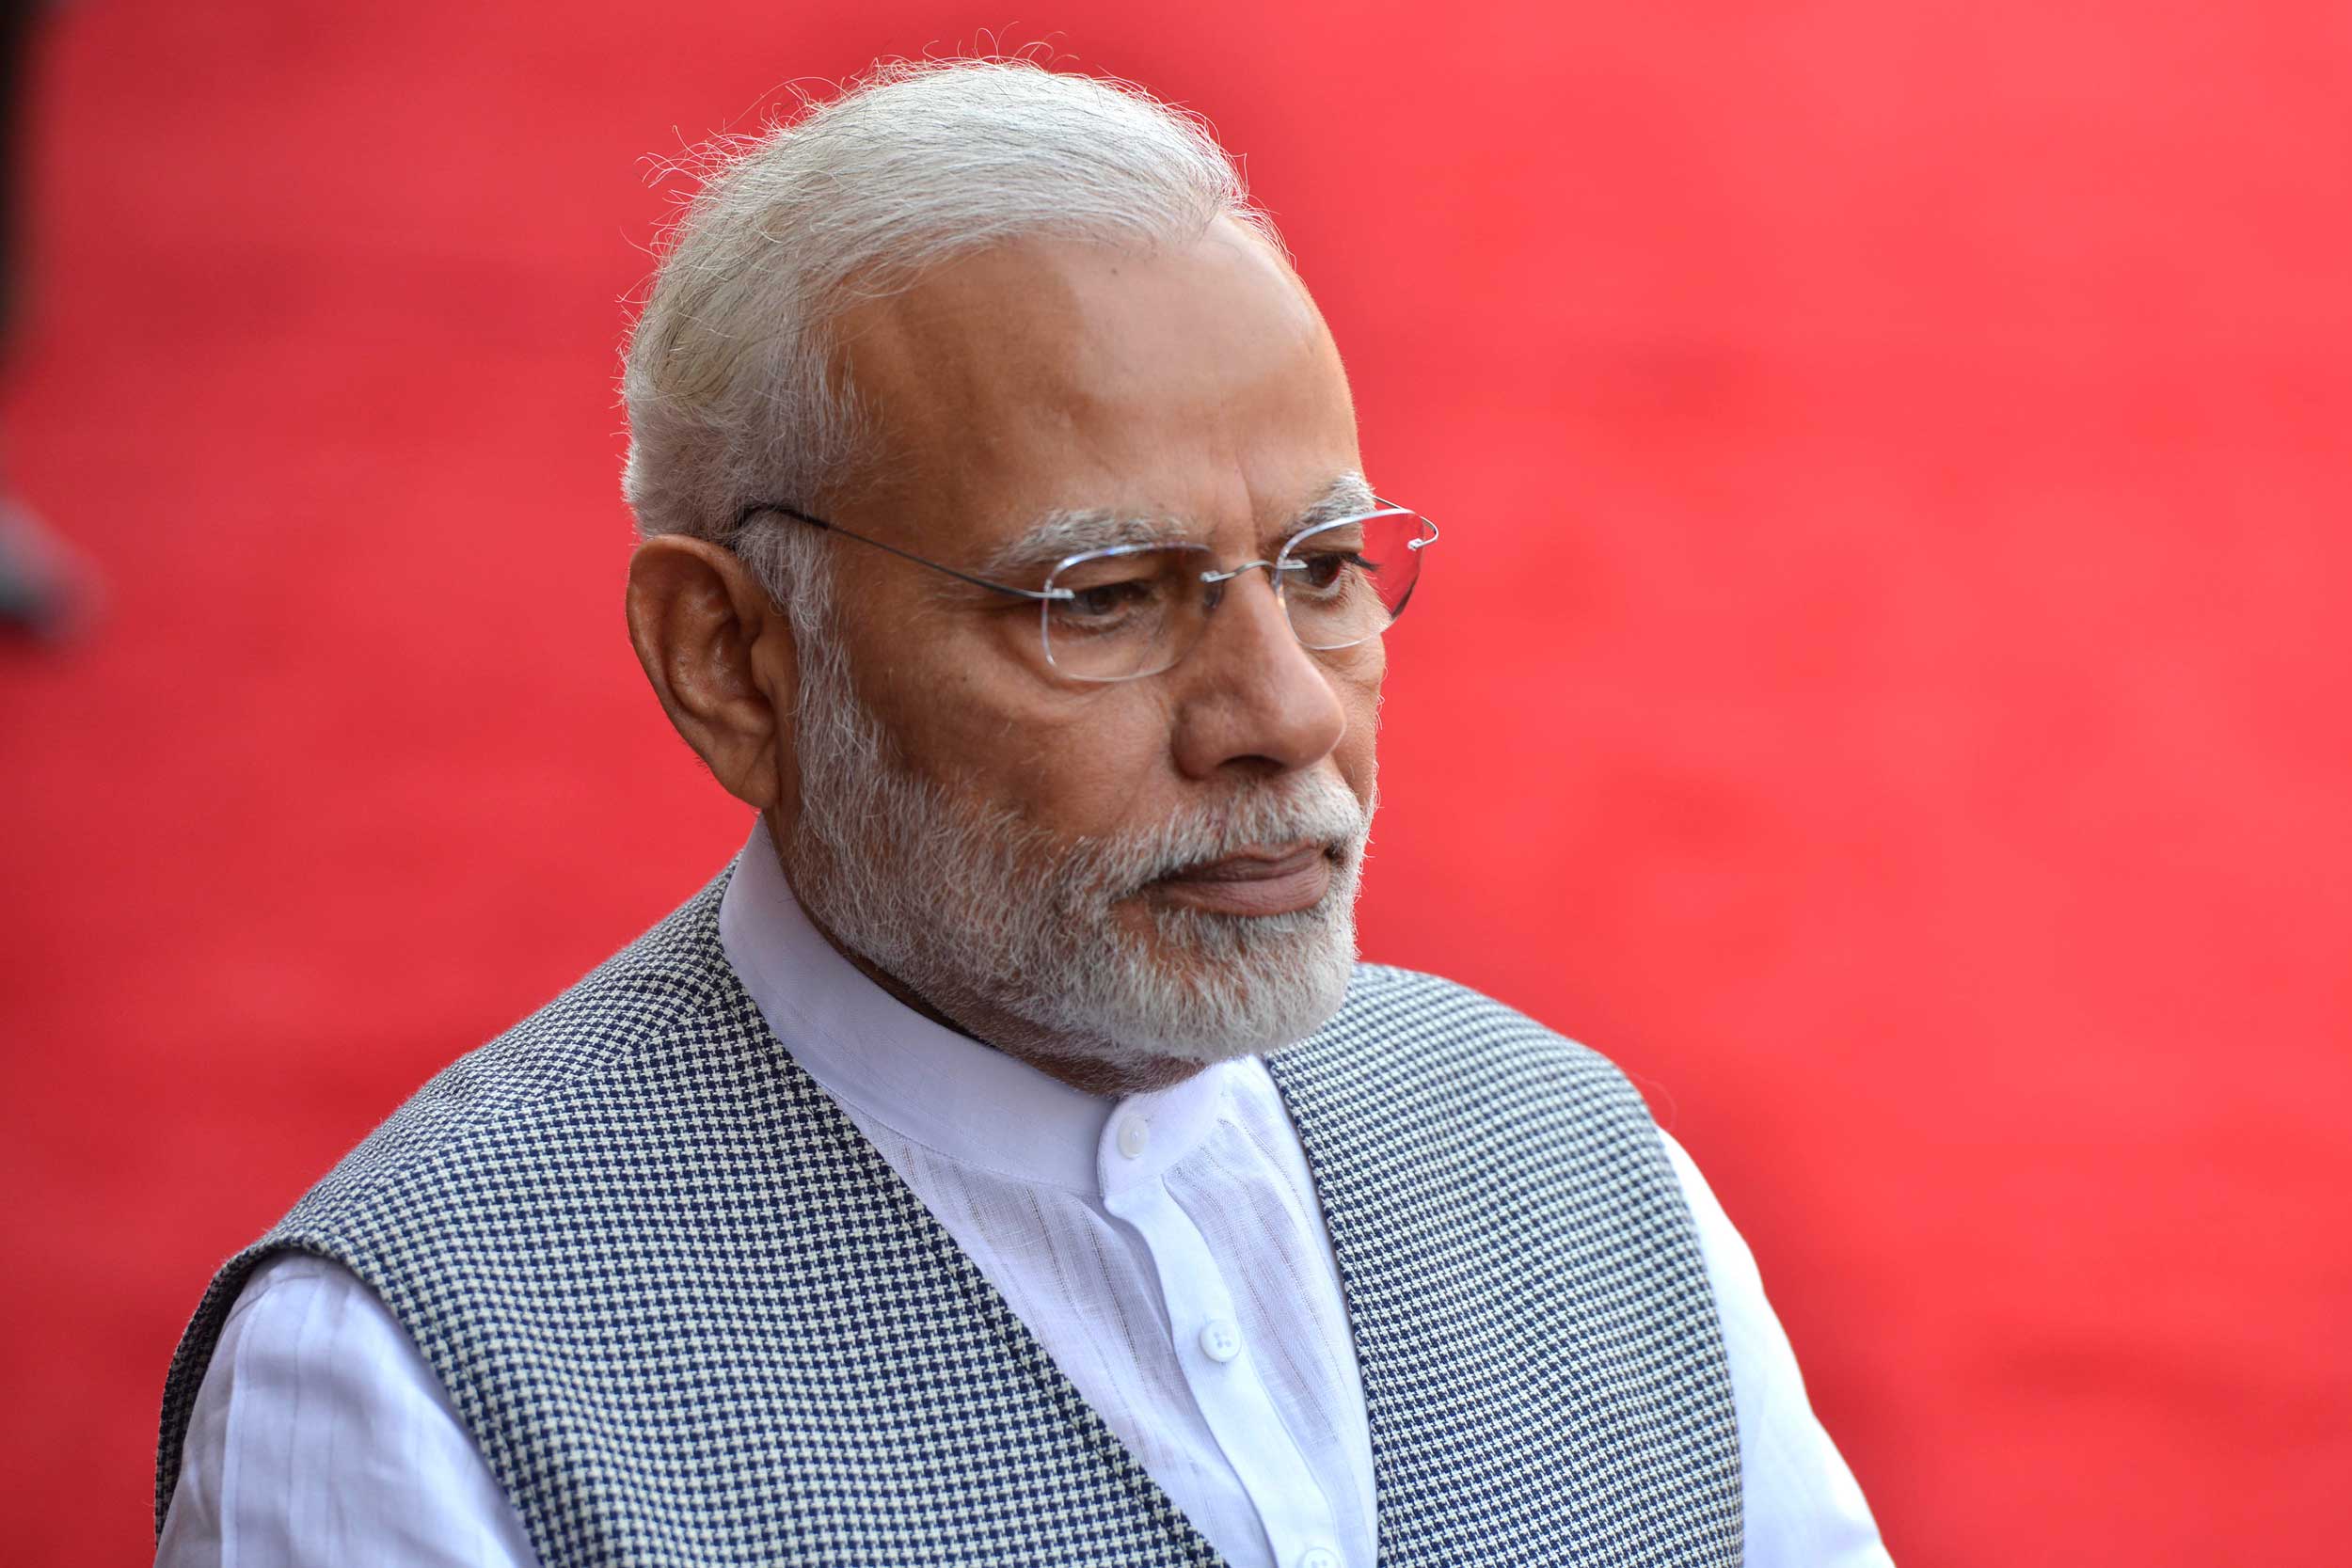 Narendra Modi told voters at a campaign rally in Rajasthan that they needed to elect him to a second term because he alone could defeat the terrorists. “Should terrorism be finished or not?” he asked. 